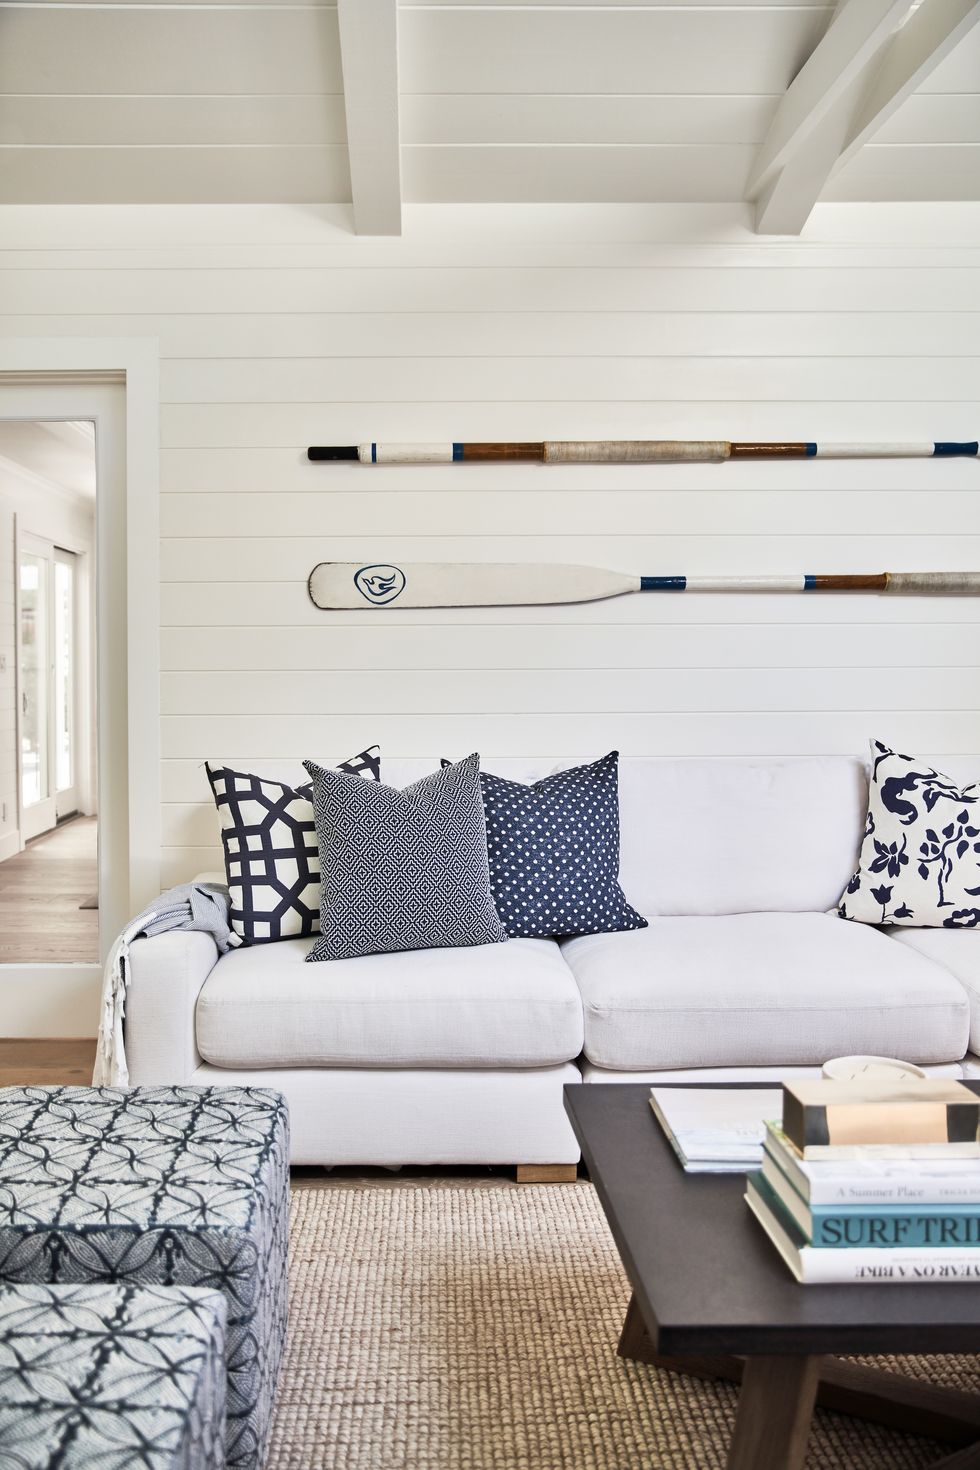 Chantilly Lace (Benjamin Moore) in coastal living room with shiplap, oars, and design by Kriste Michelini Interiors. House Beautiful - Photo: Thomas Kuoh. #chantillylace